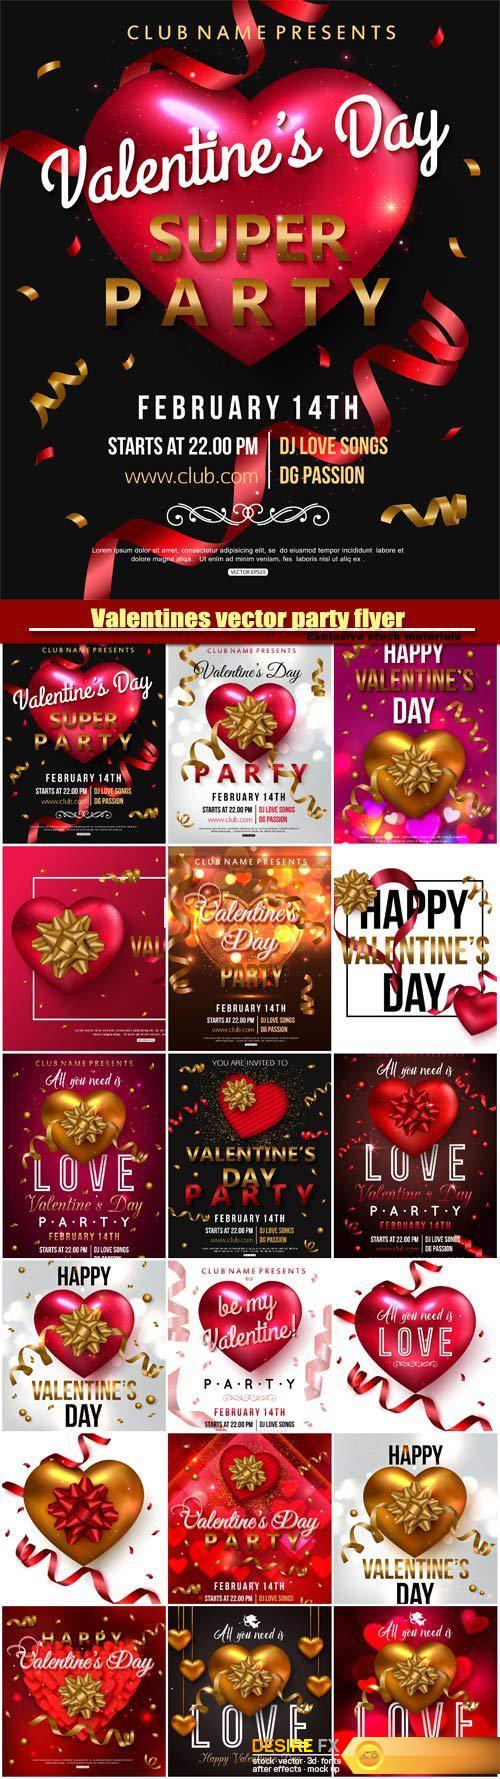 Valentines vector party flyer design with red heart bow ribbon